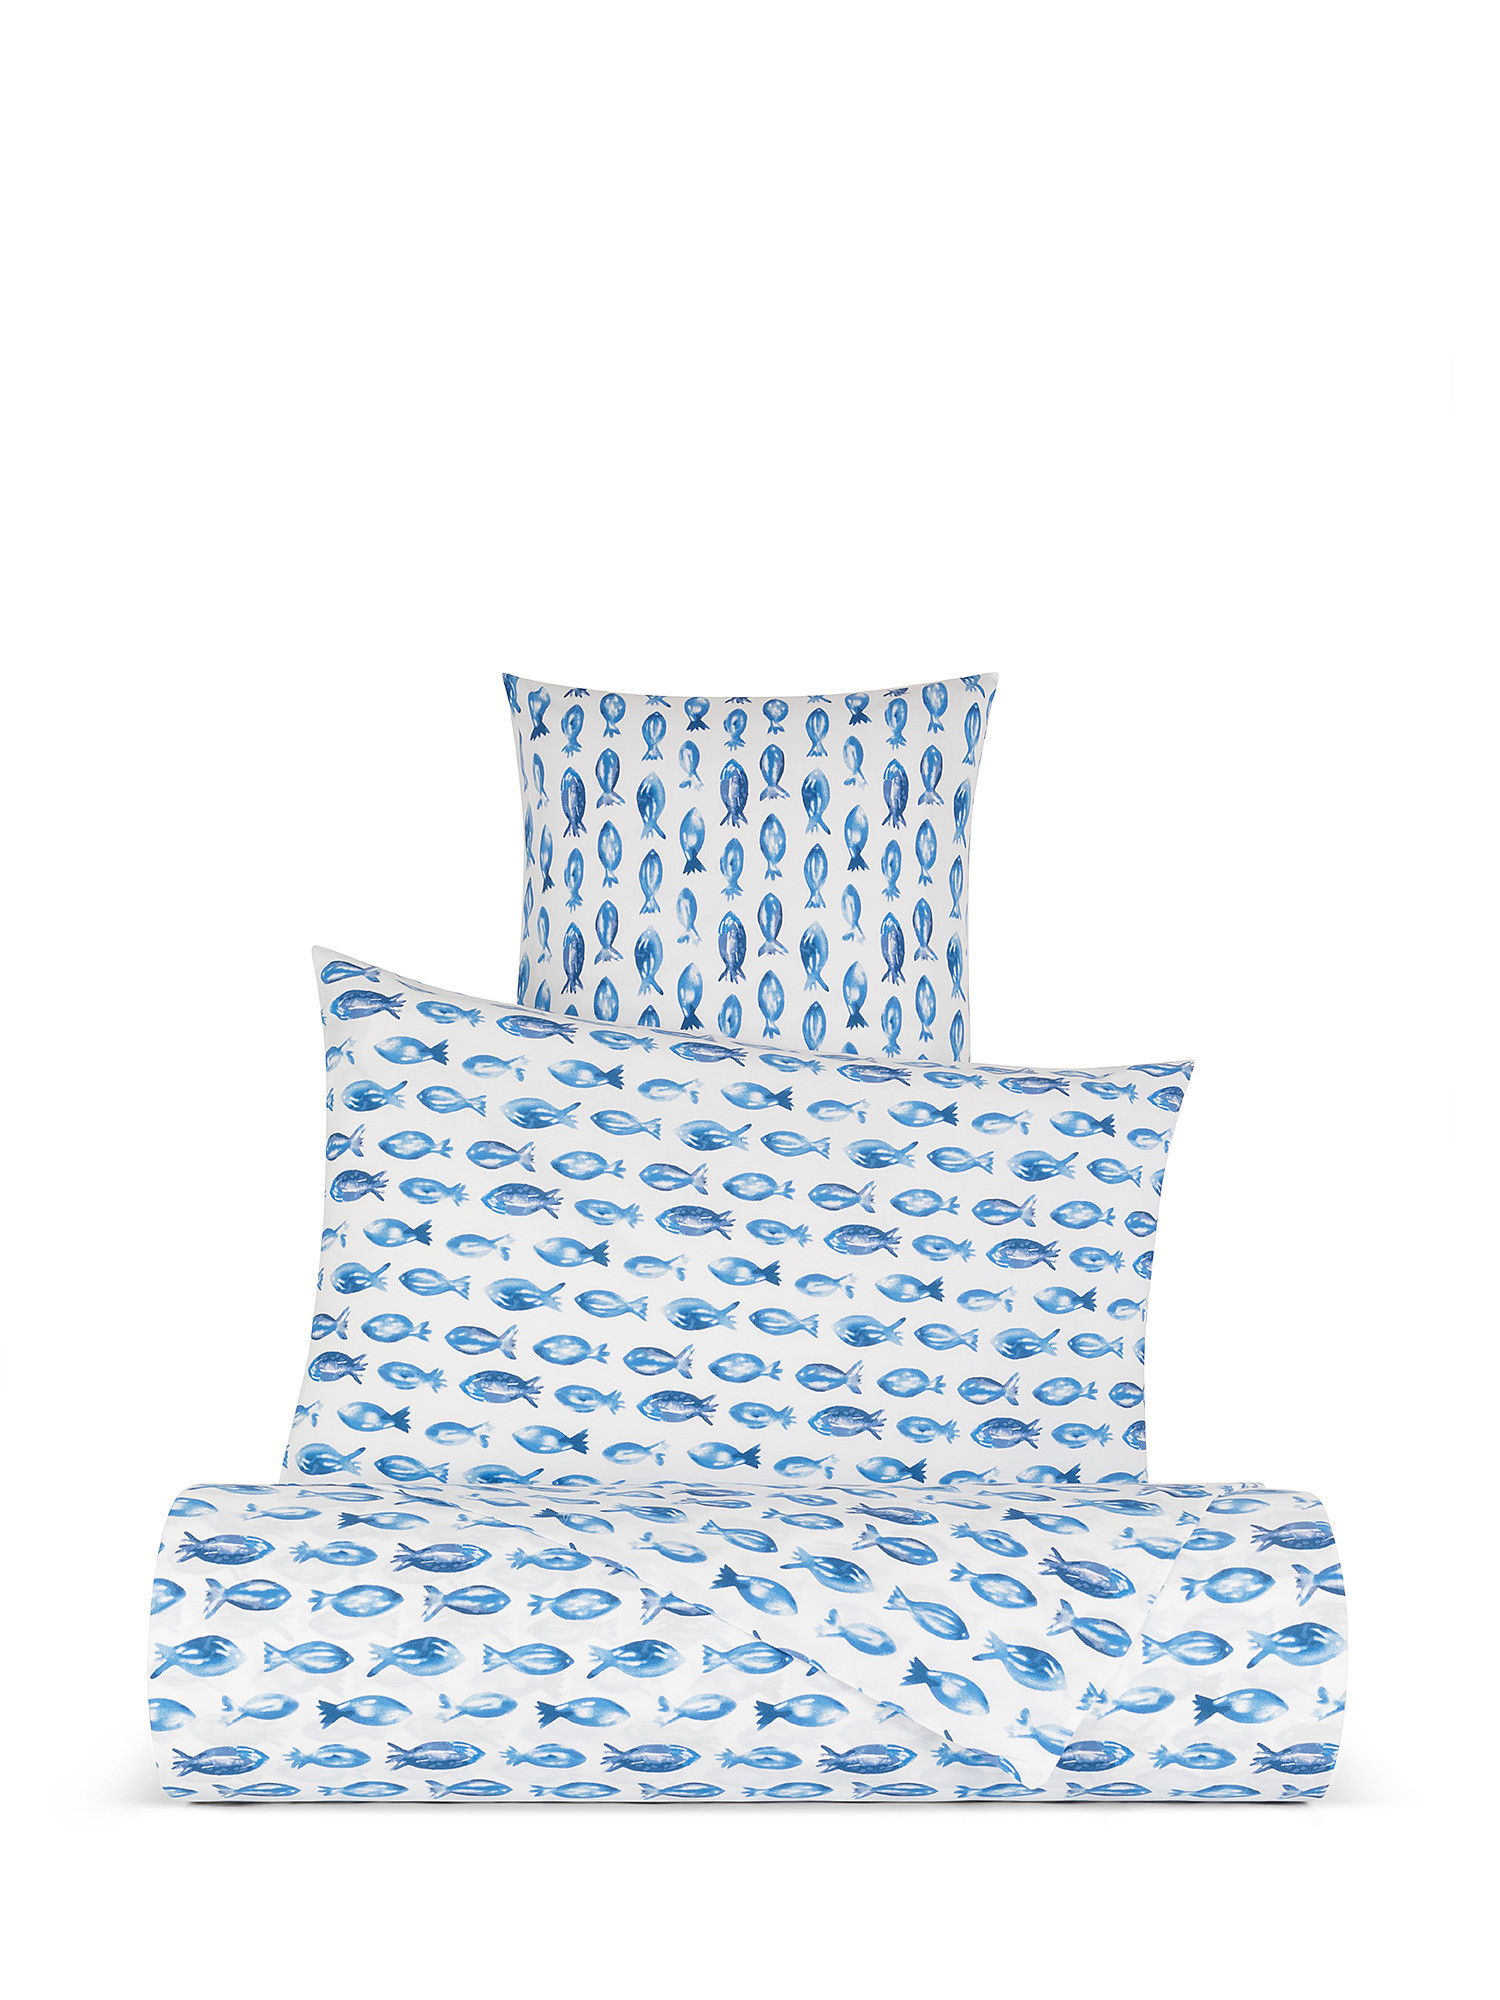 Duvet cover set in cotton percale with fish pattern, White, large image number 0